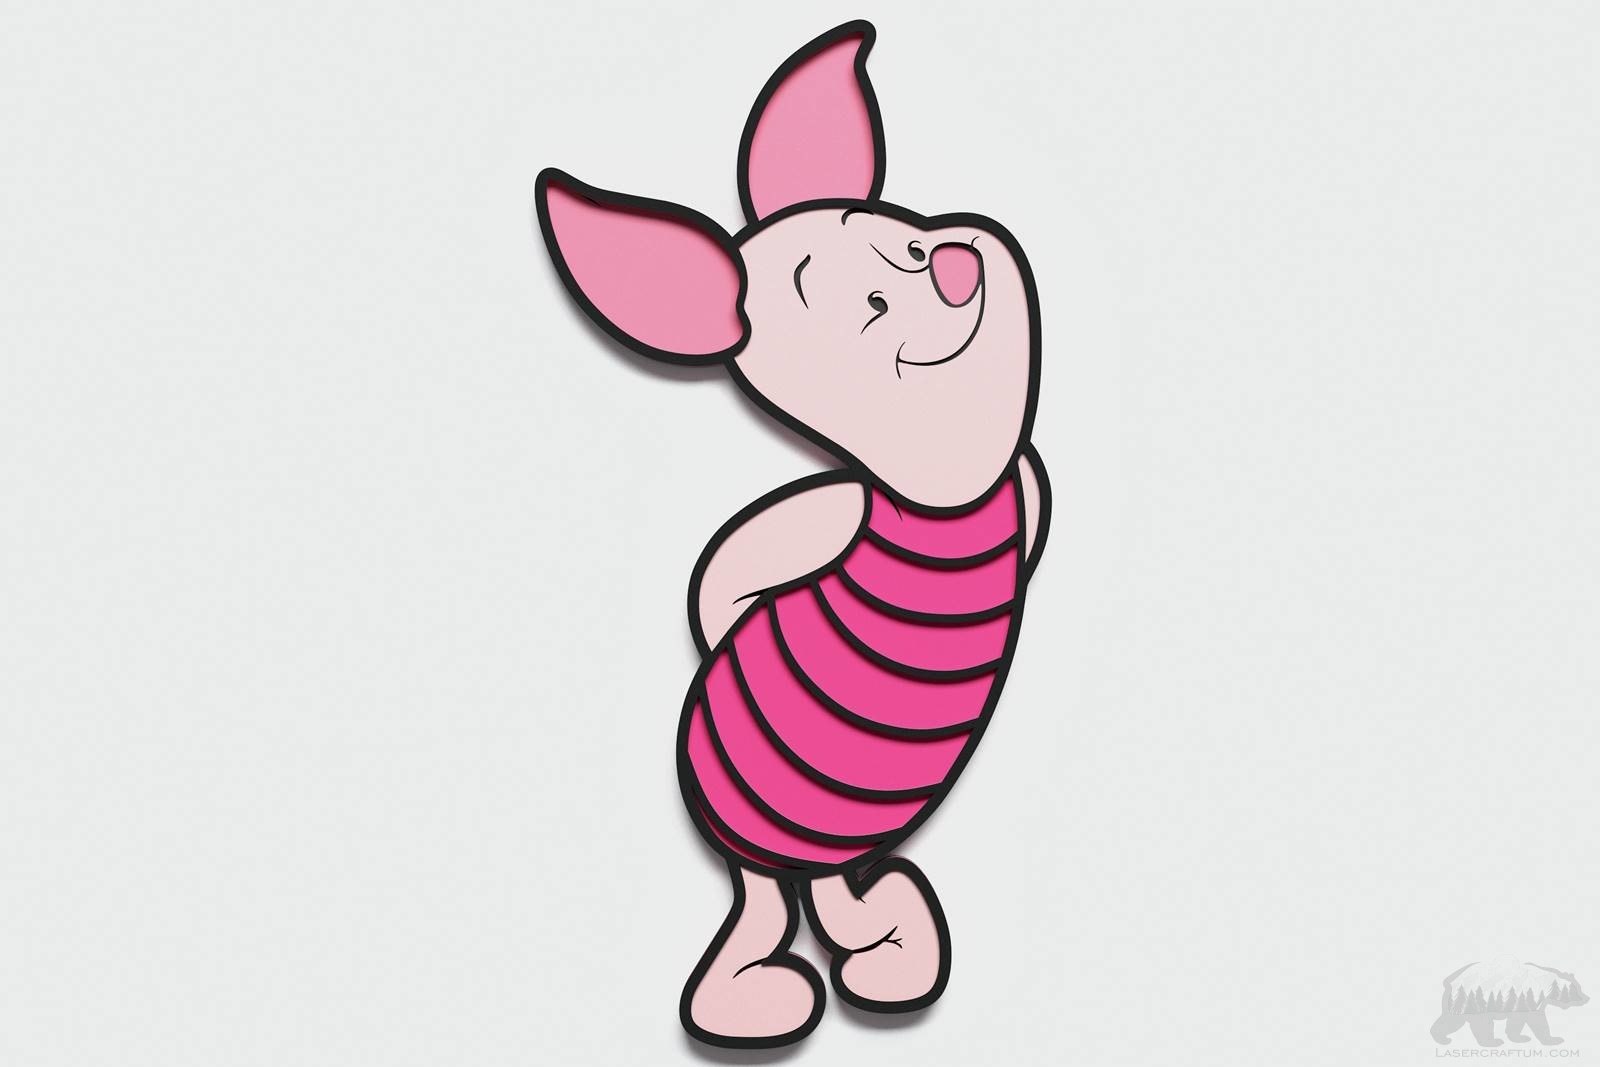 Piglet Layered Design for cutting